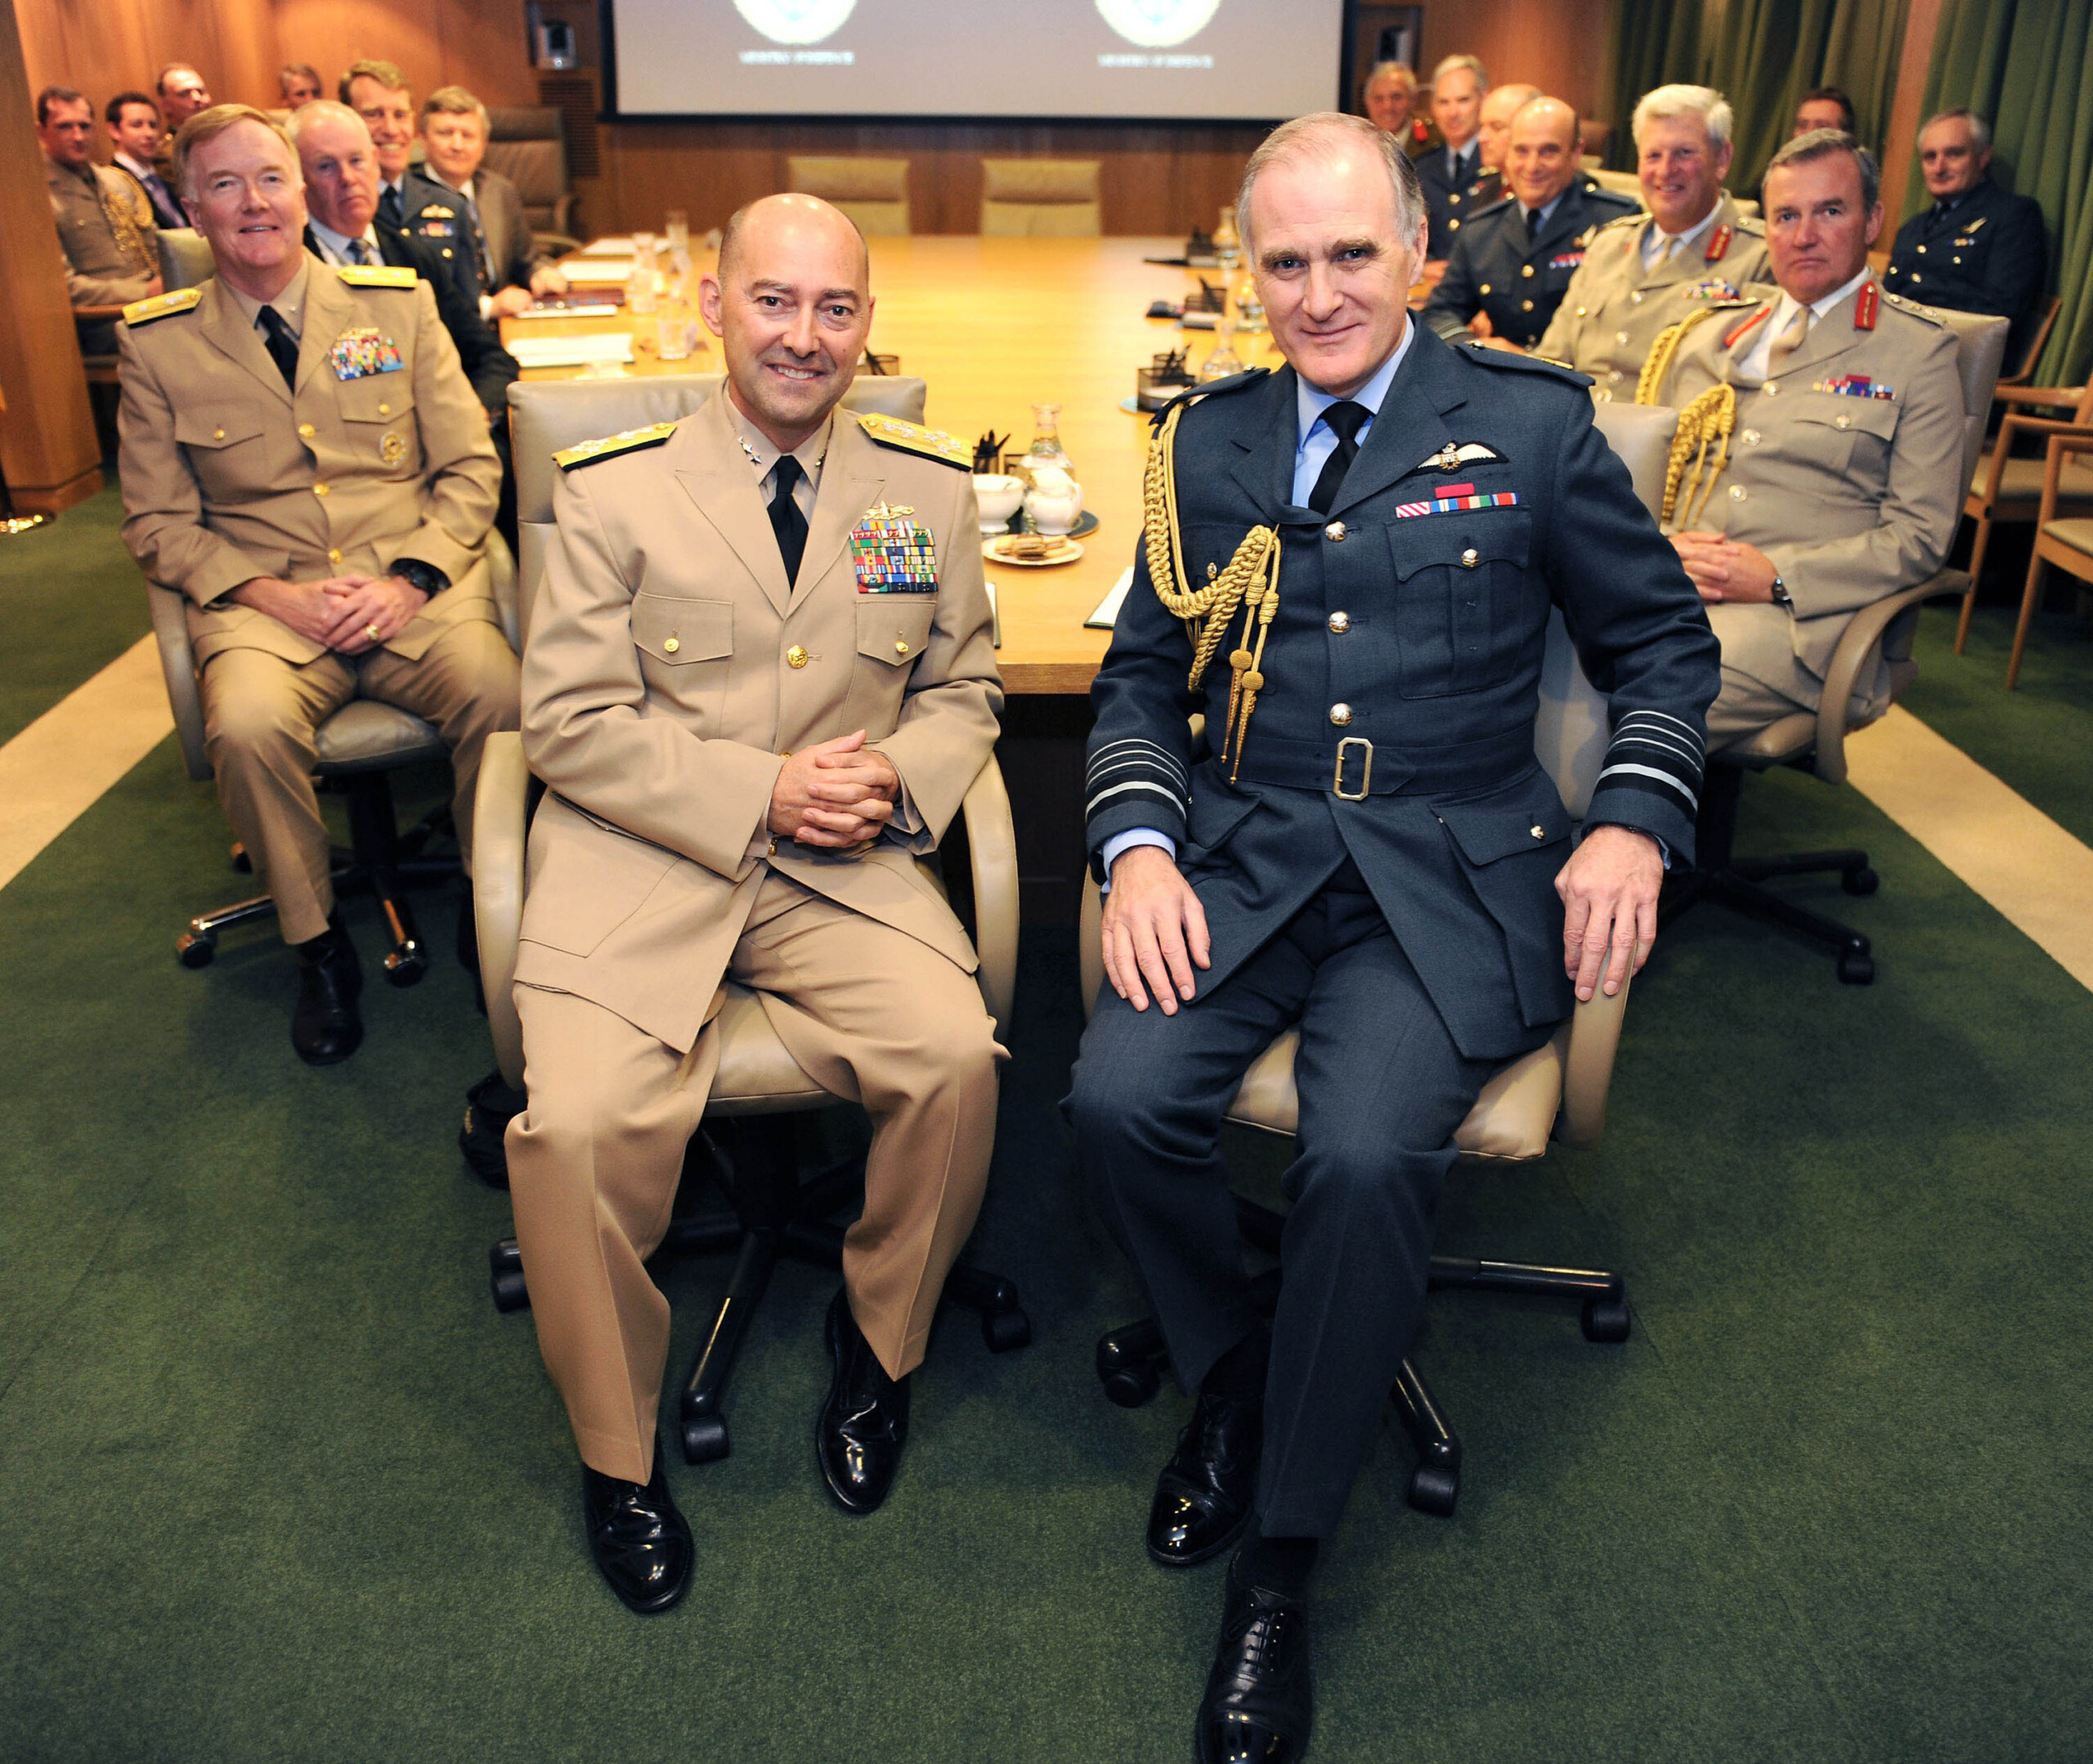 Supreme Allied Commander Europe, Adm. James G. Stavridis, visits the Ministry of Defence (London). Stavridis (front left) is shown with Air Chief Marshal Sir Jock Stirrup, chief of the Defence Staff (front right) in the Mountbatten Suite, Ministry of Defence main building London. (Photo by Mez Merrill/Released)